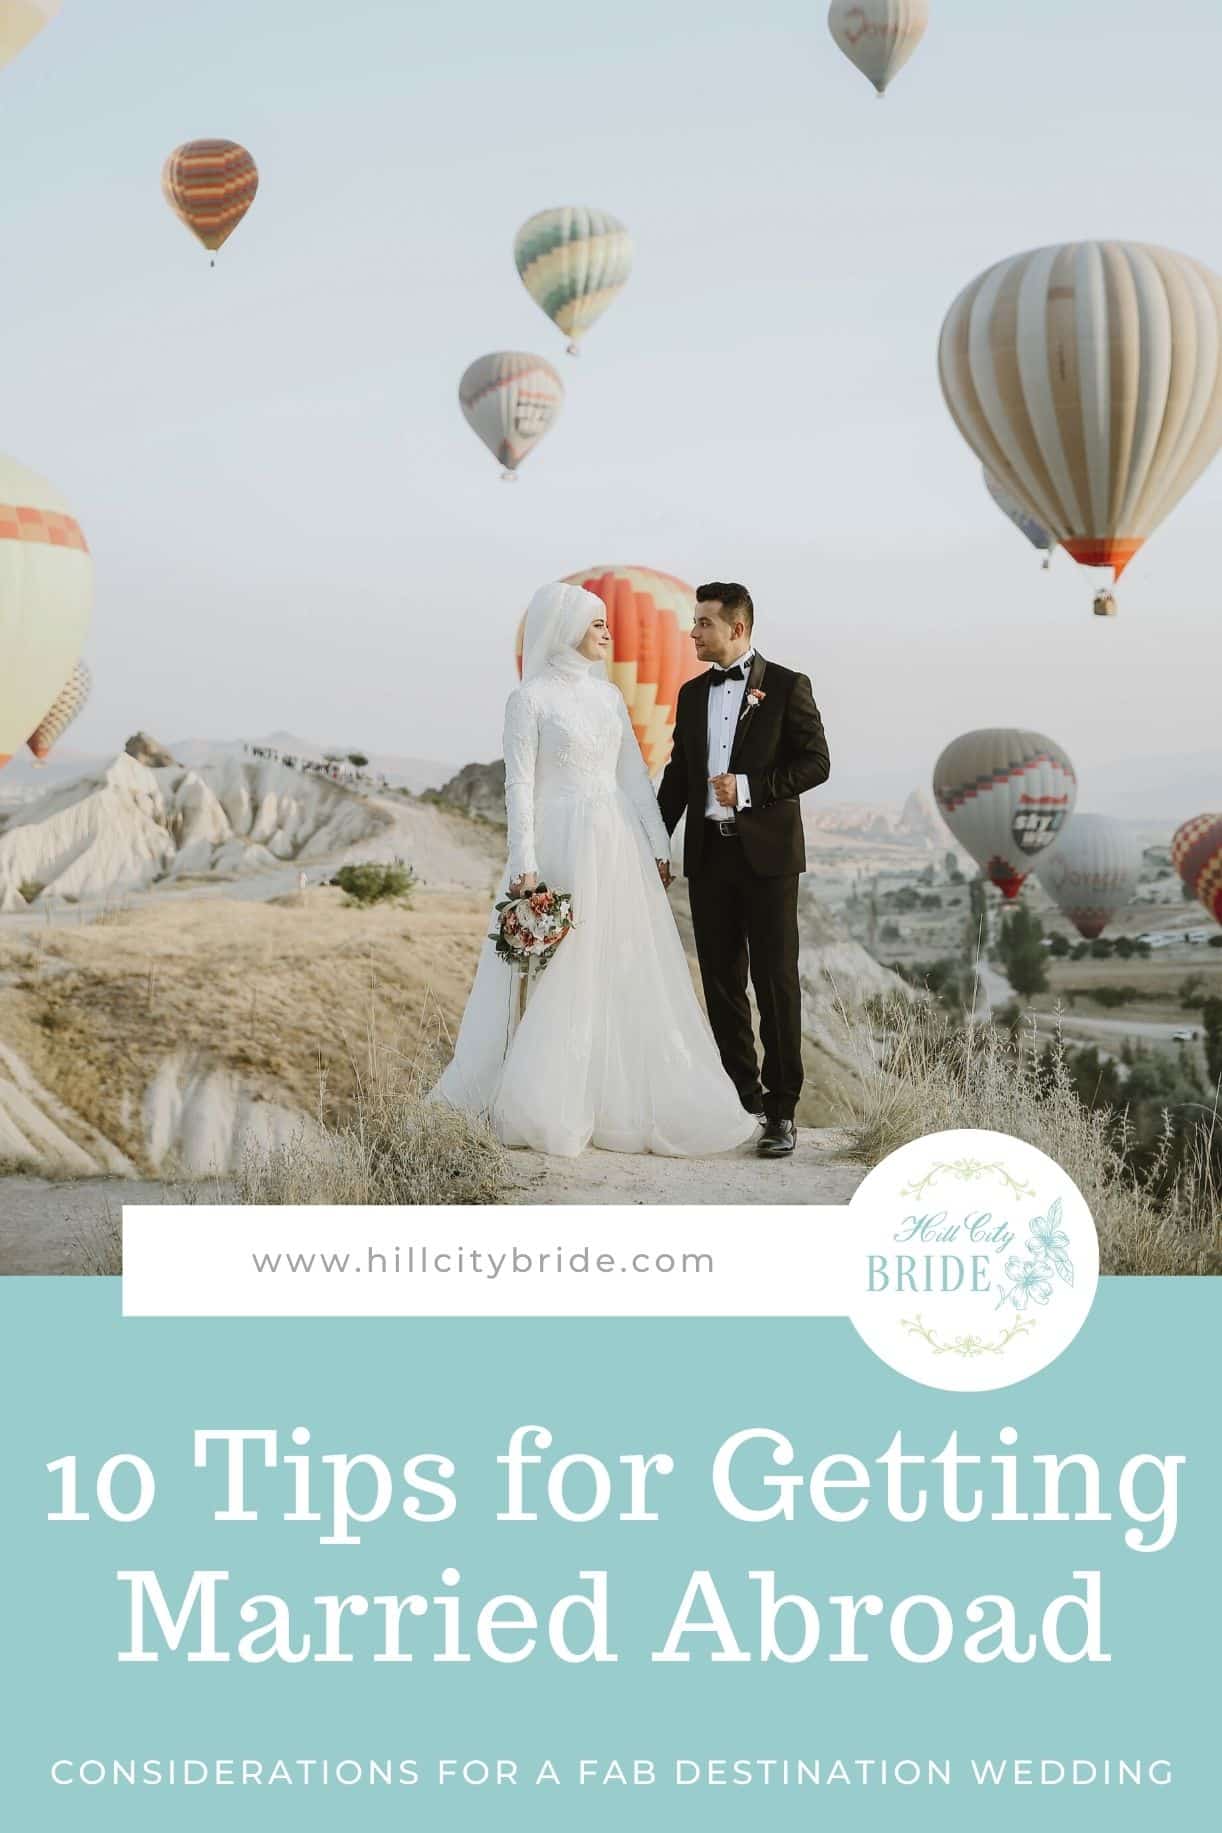 Tips for Getting Married Abroad